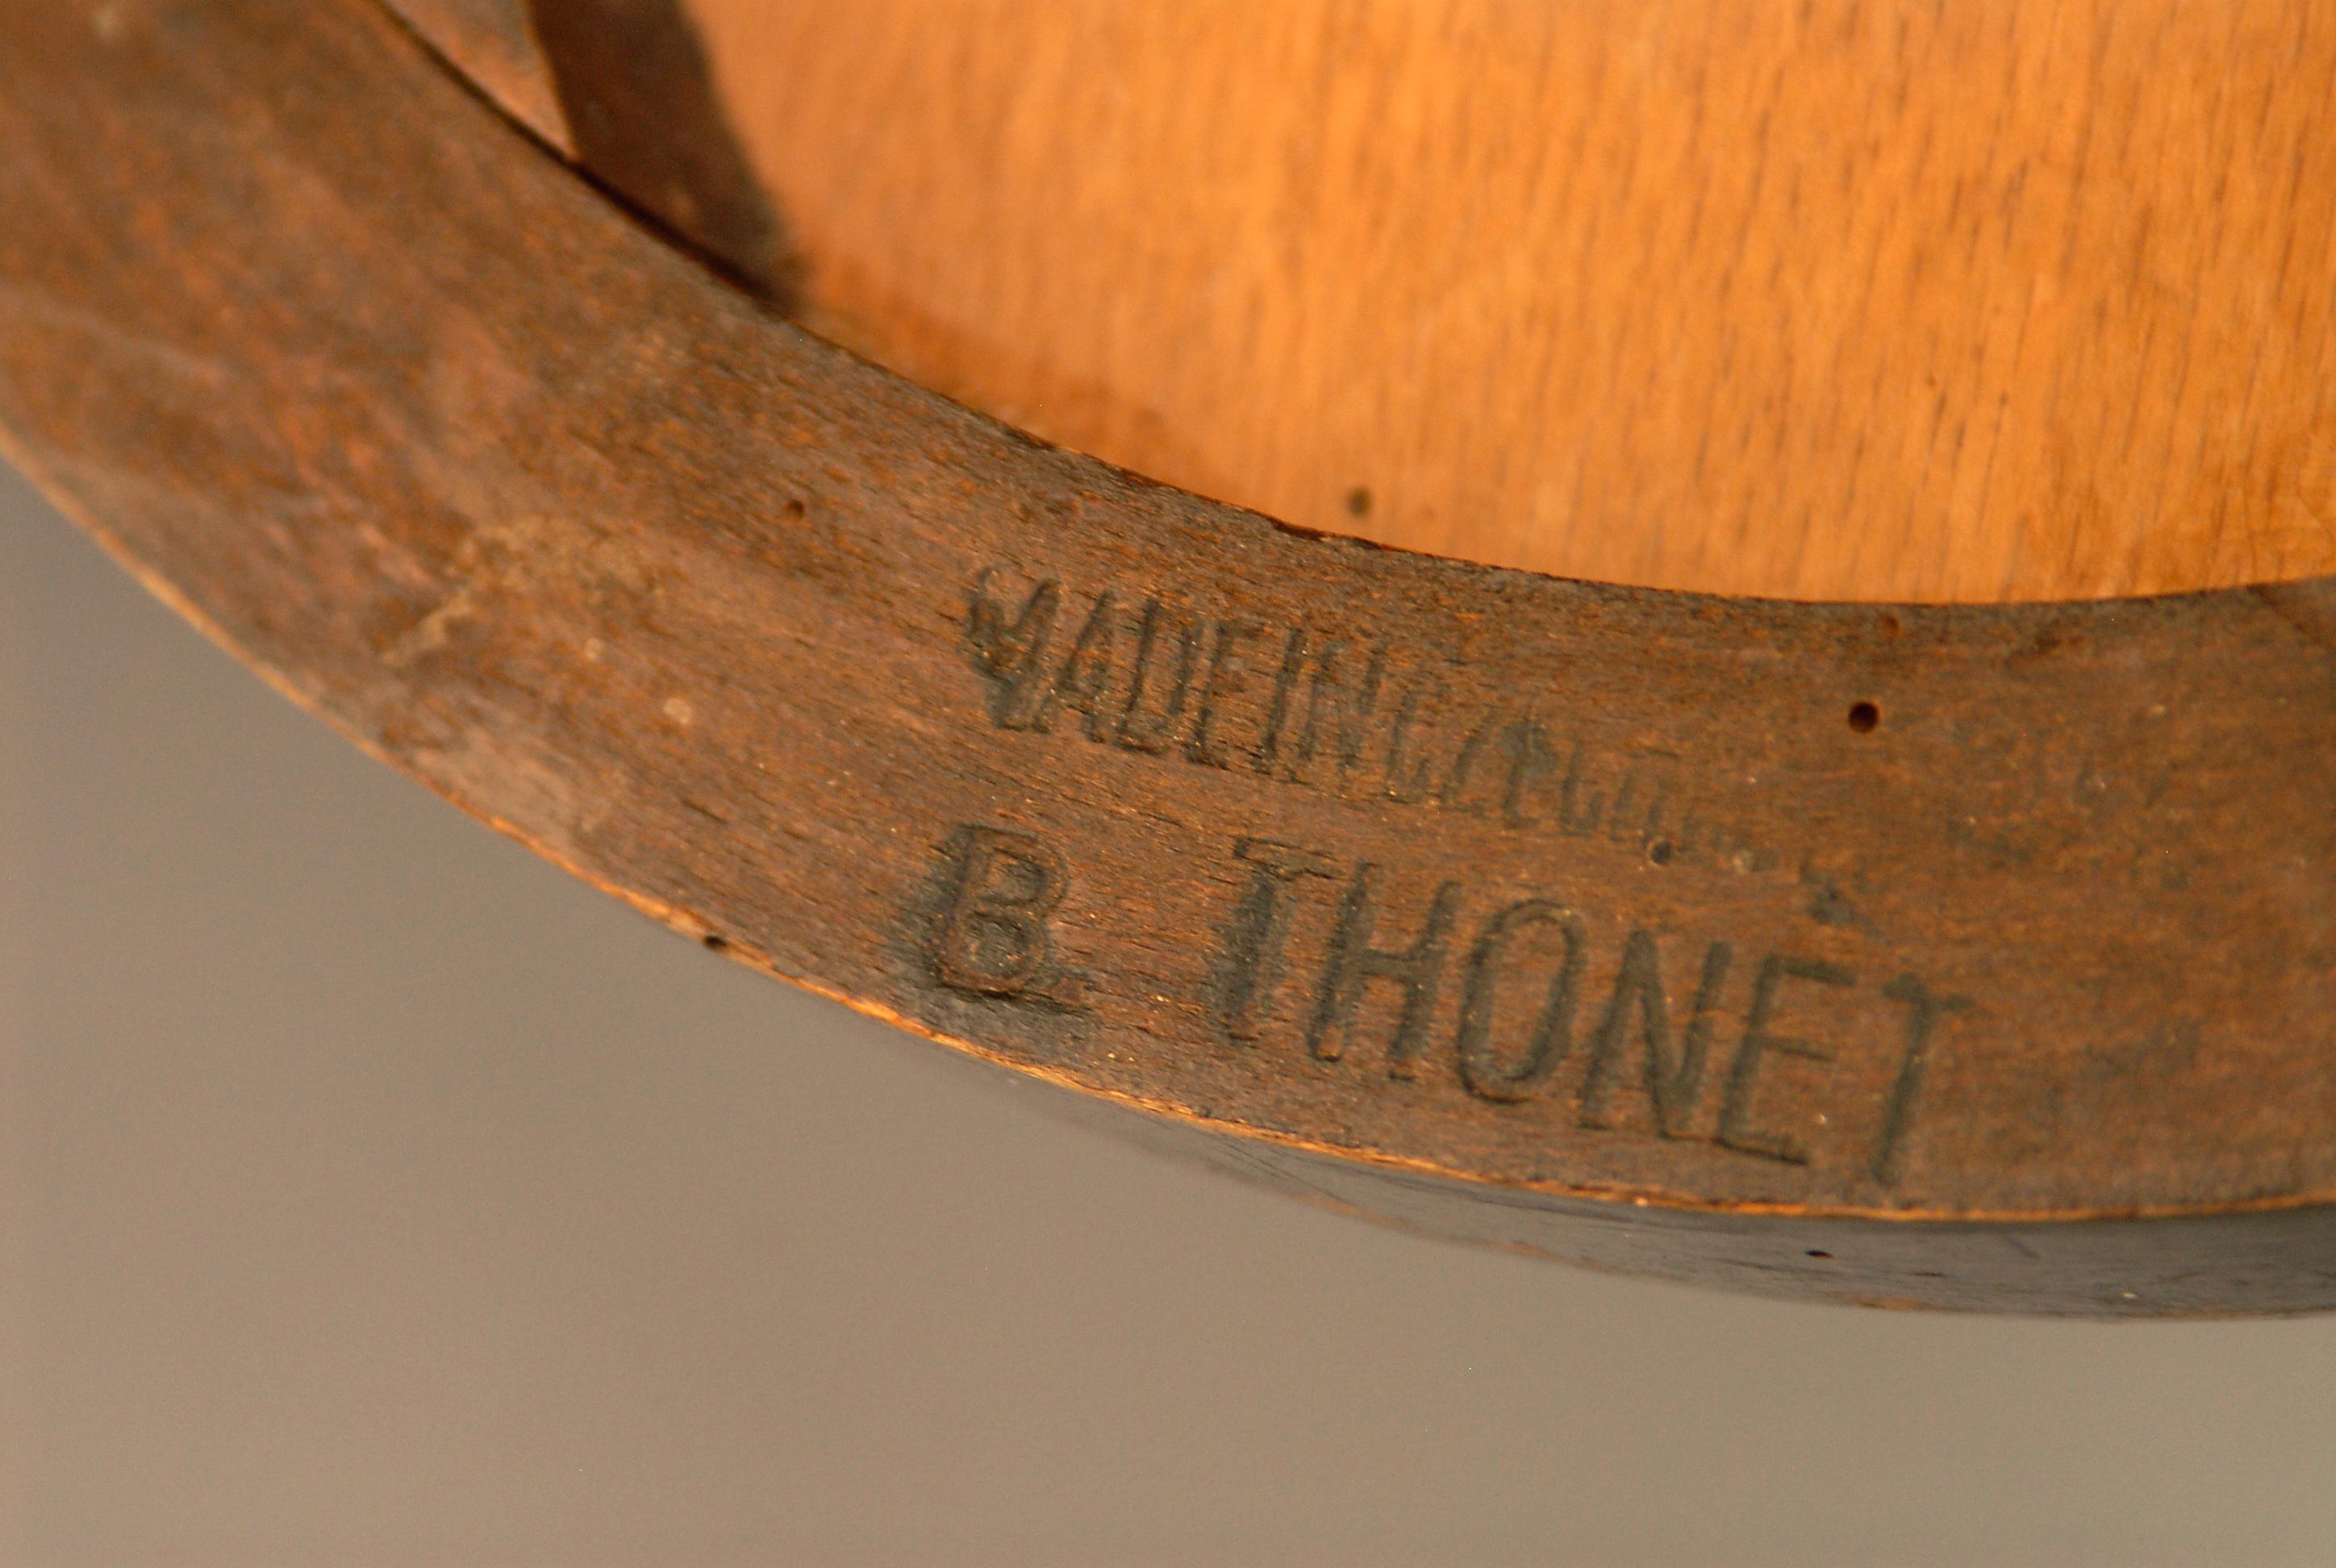 Hand-Crafted Thonet Child Chair No14 / designed 1859 Vienna / Stamped and labeled / Bentwood